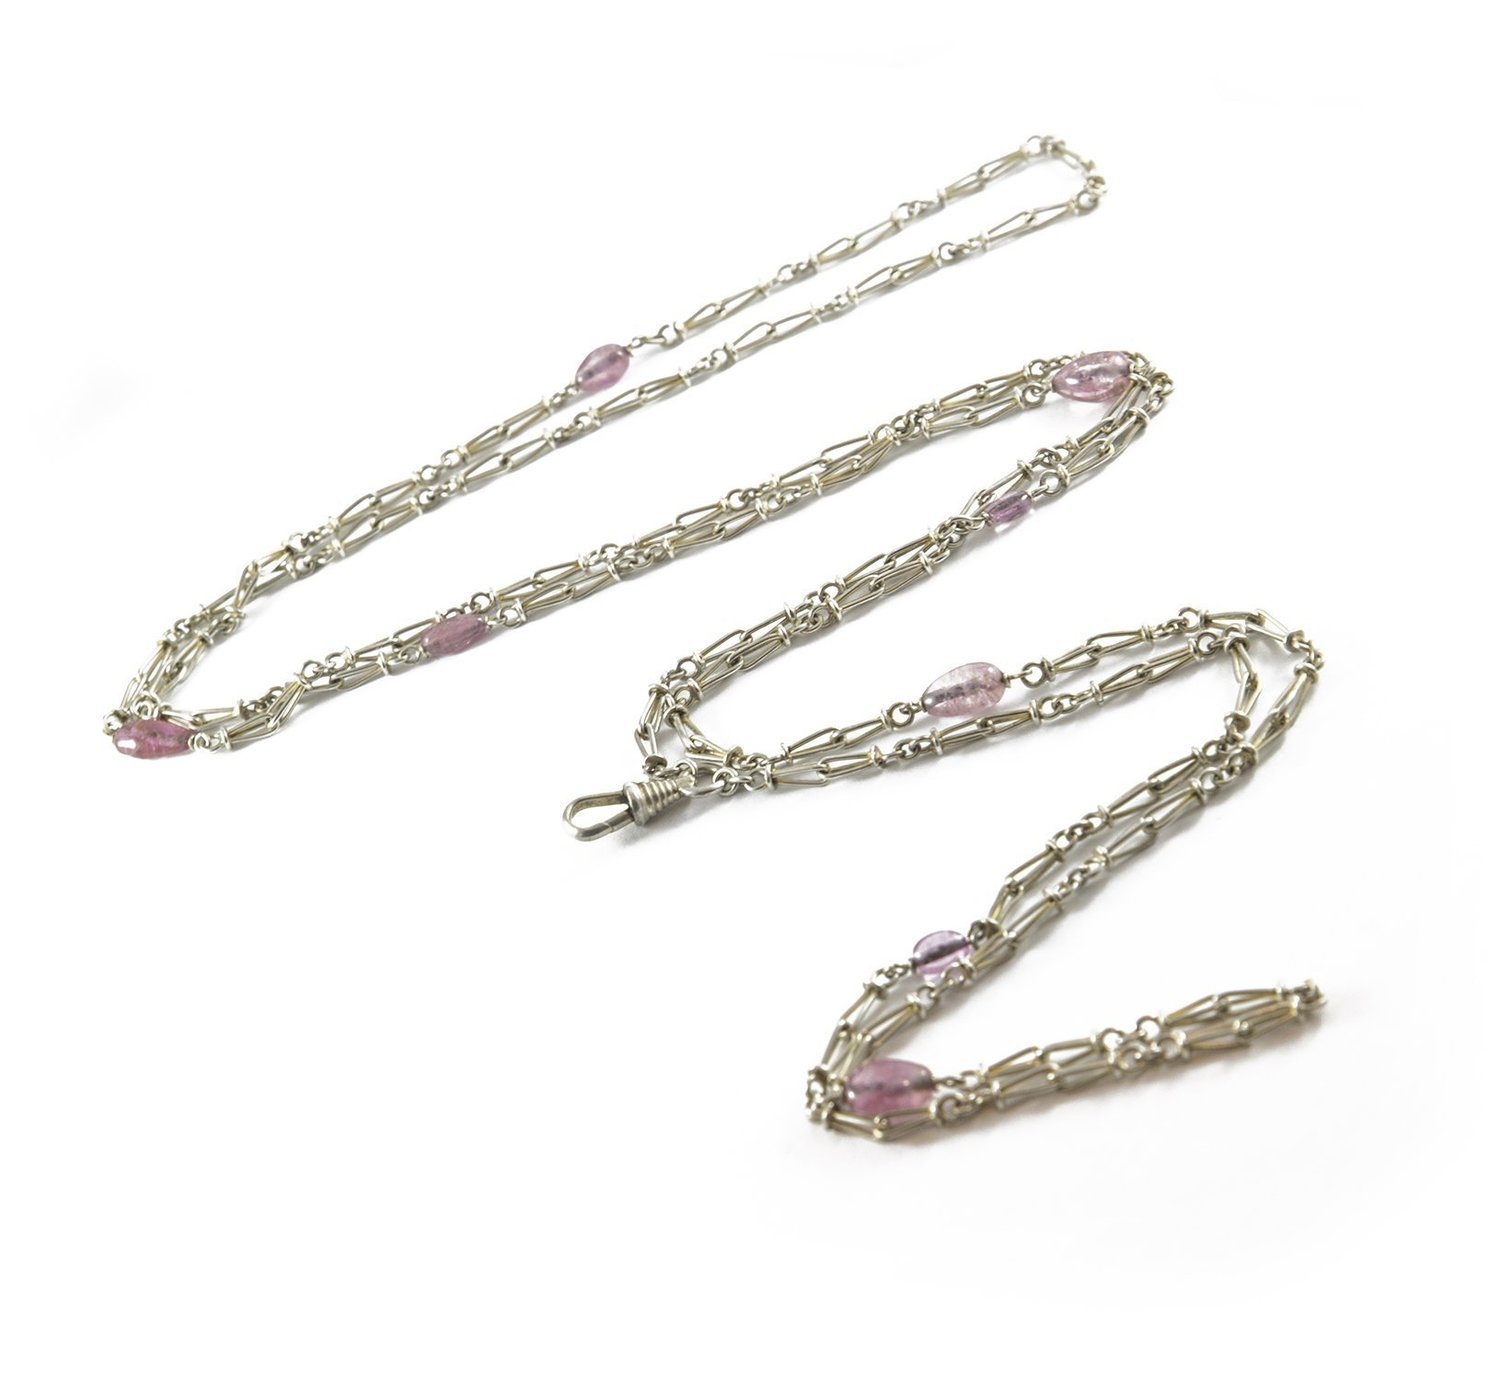 Sterling Silver Hand Made Vintage Watch Chain With Pink Tourmaline Beads